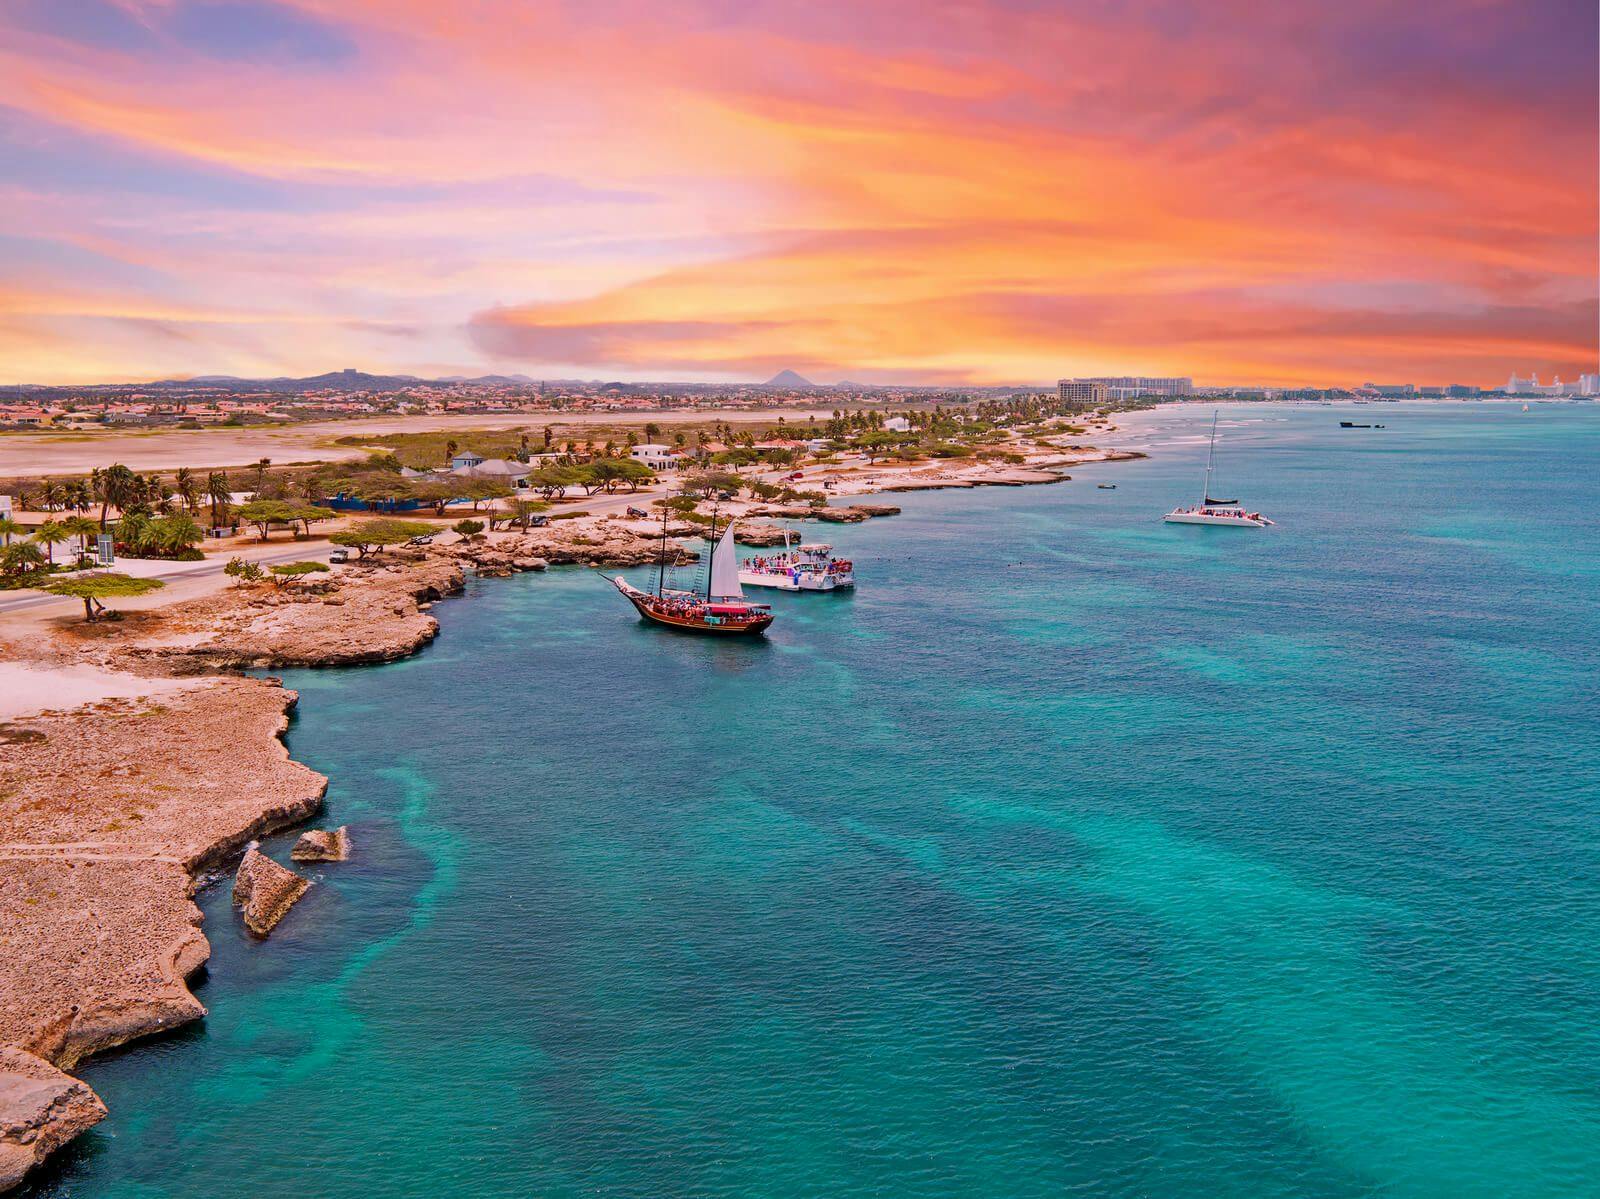 Aruba coastline at sunset with sailboats in the water moored off of a rocky beach, with pink and orange clouds in the sky